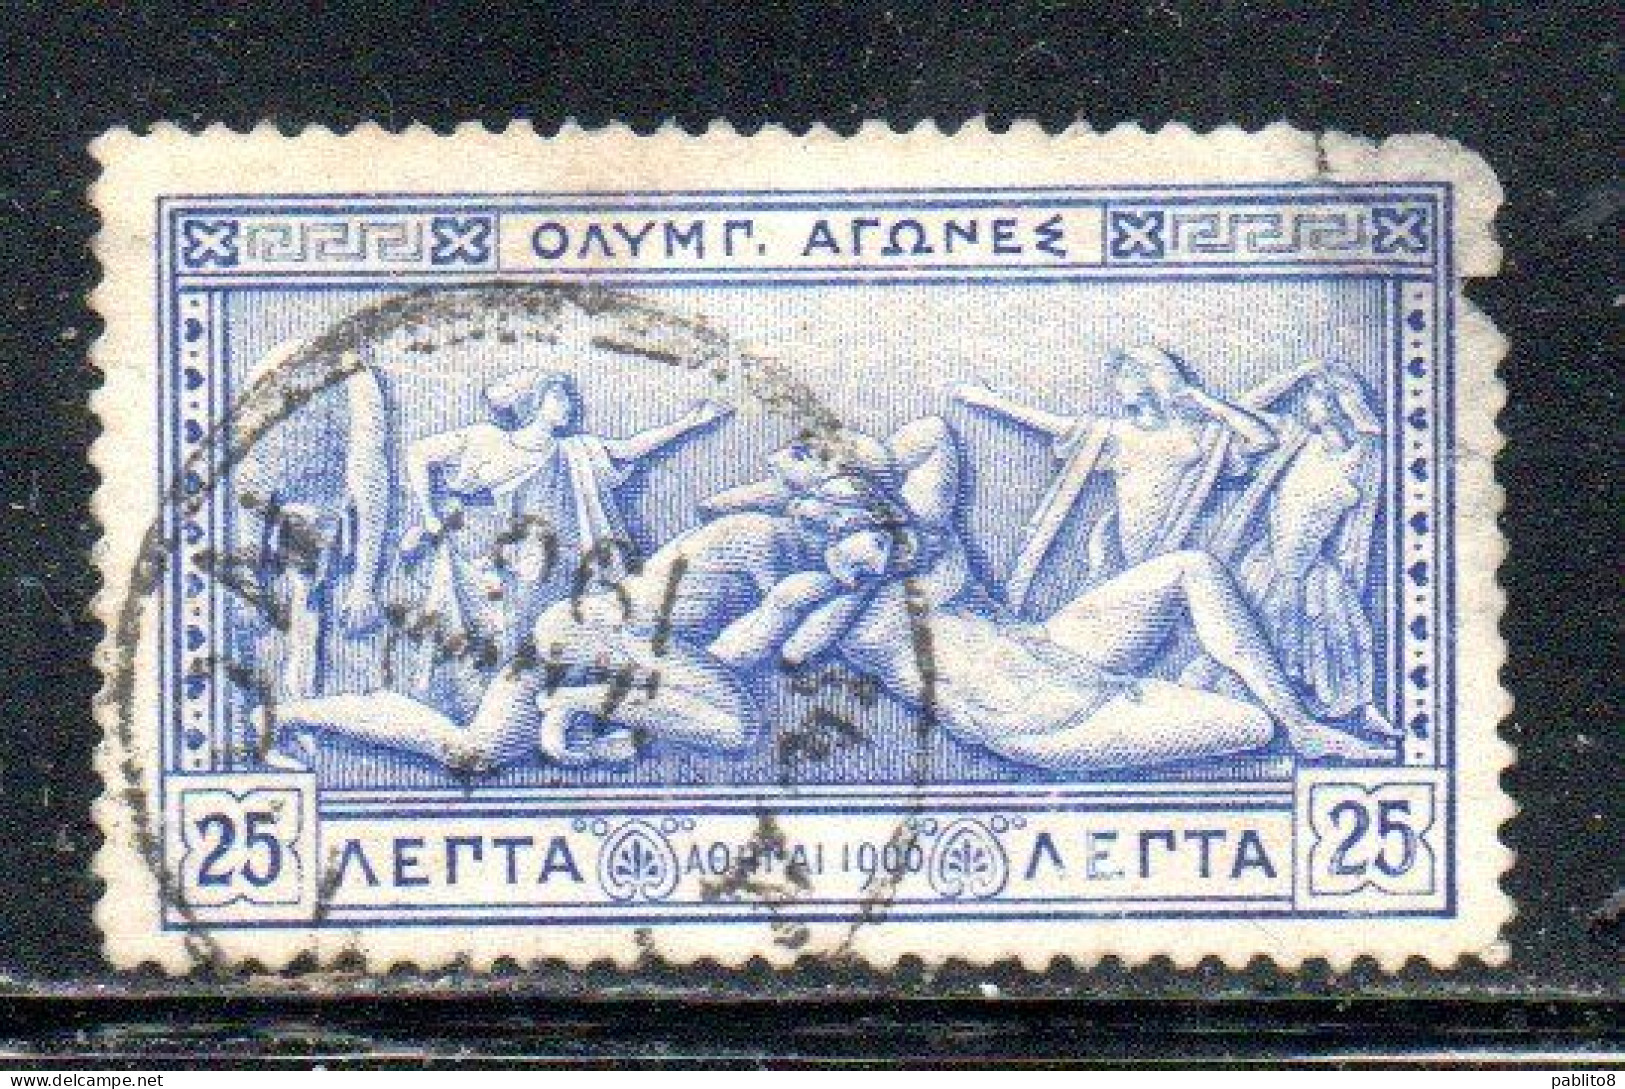 GREECE GRECIA ELLAS 1906 GREEK SPECIAL OLYMPIC GAMES ATHENS STRUGGLE OF HERCULES AND ANTEUS 25l USED USATO OBLITERE' - Usati